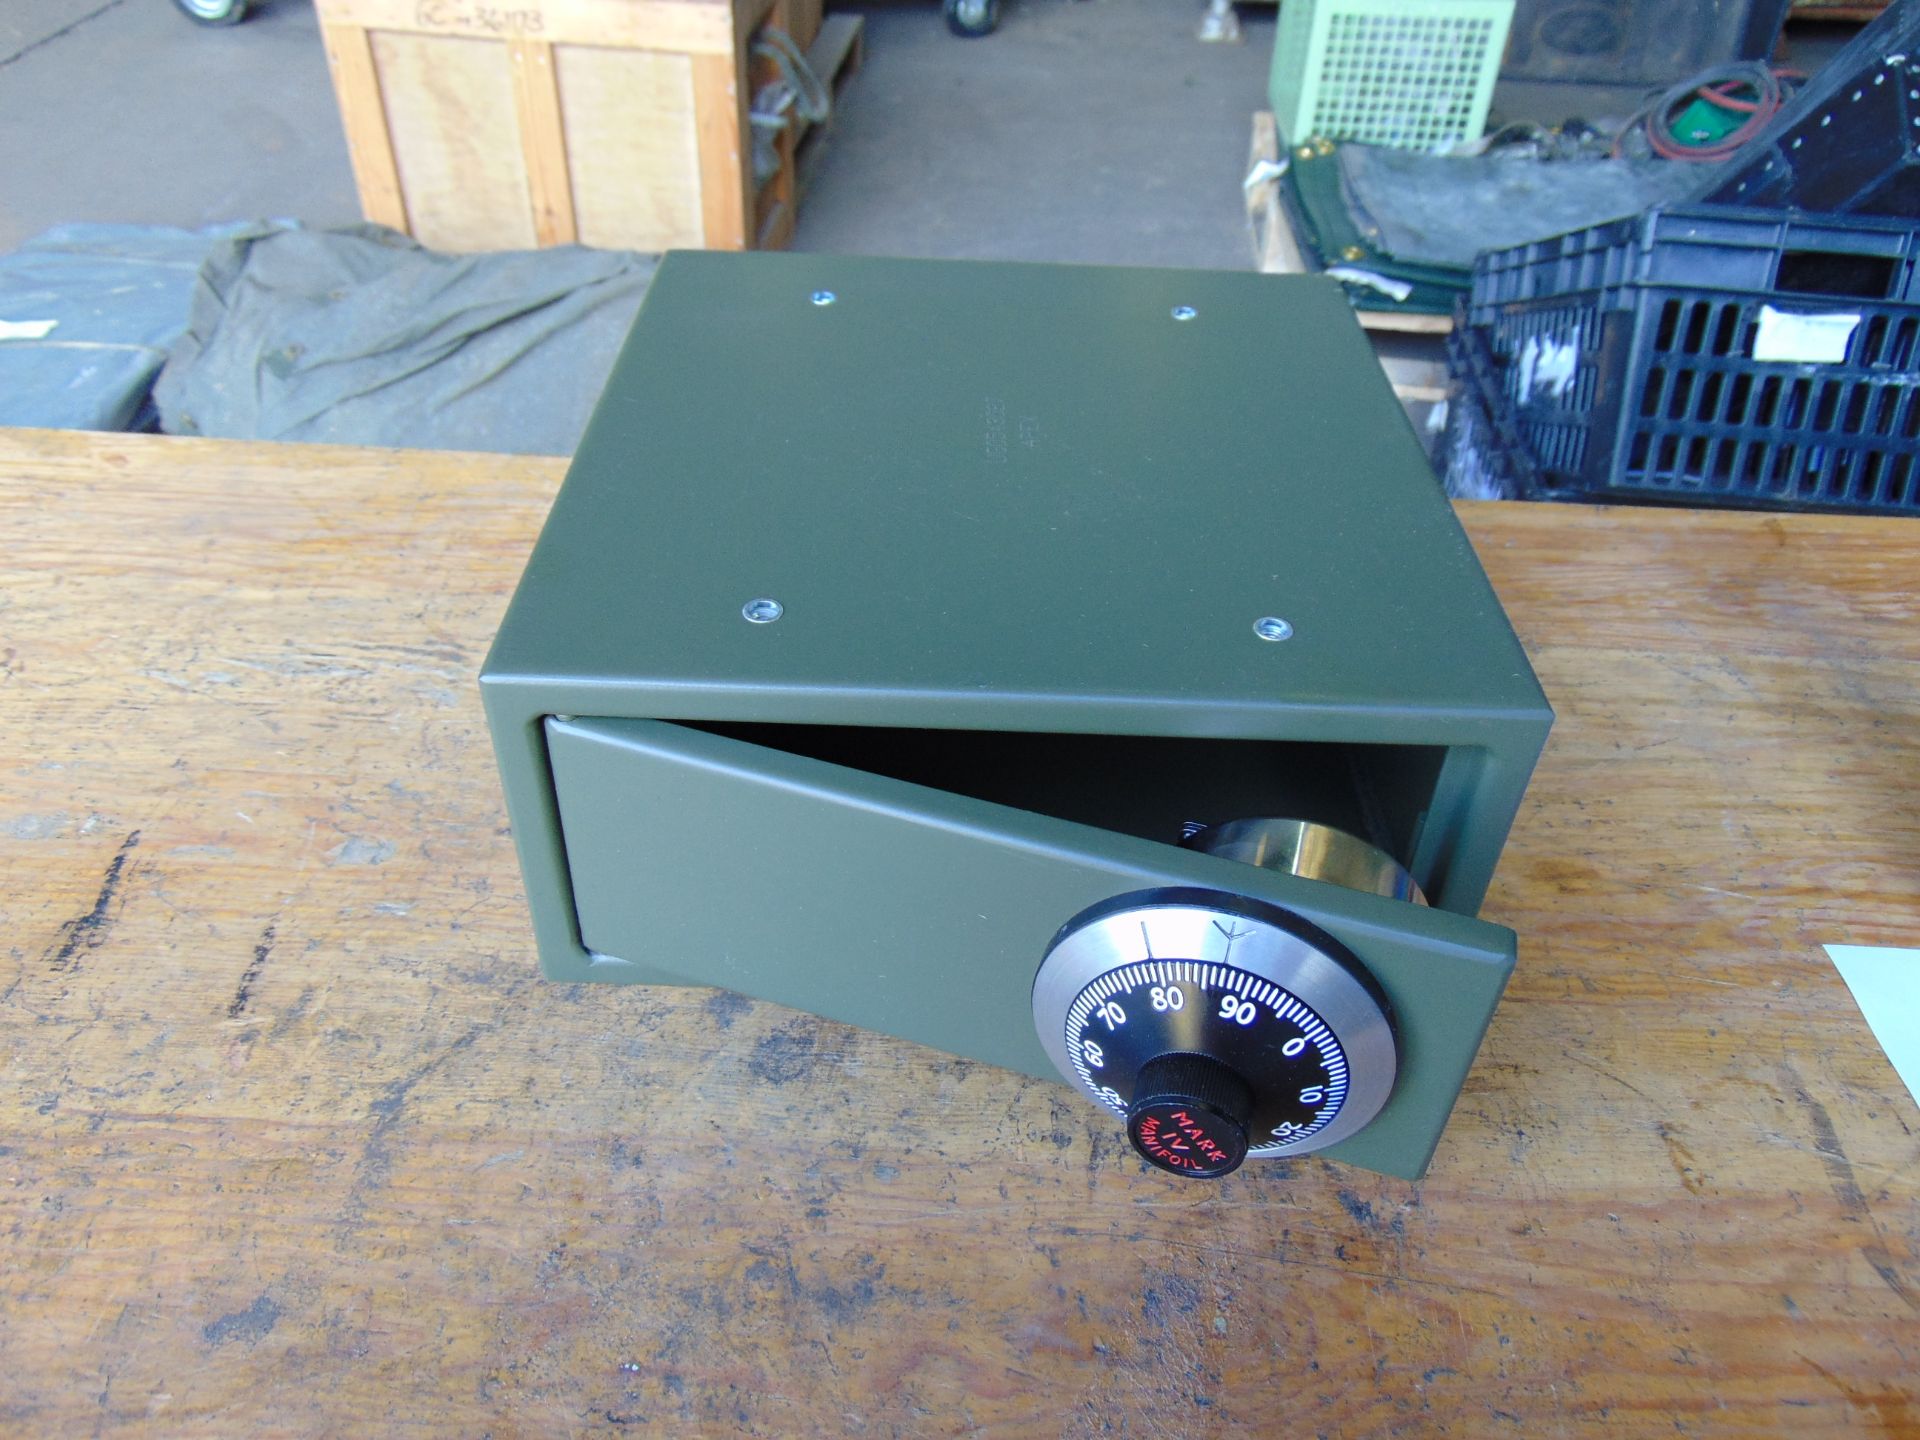 New Unissued Vehicle Safe as Shown - Image 7 of 7